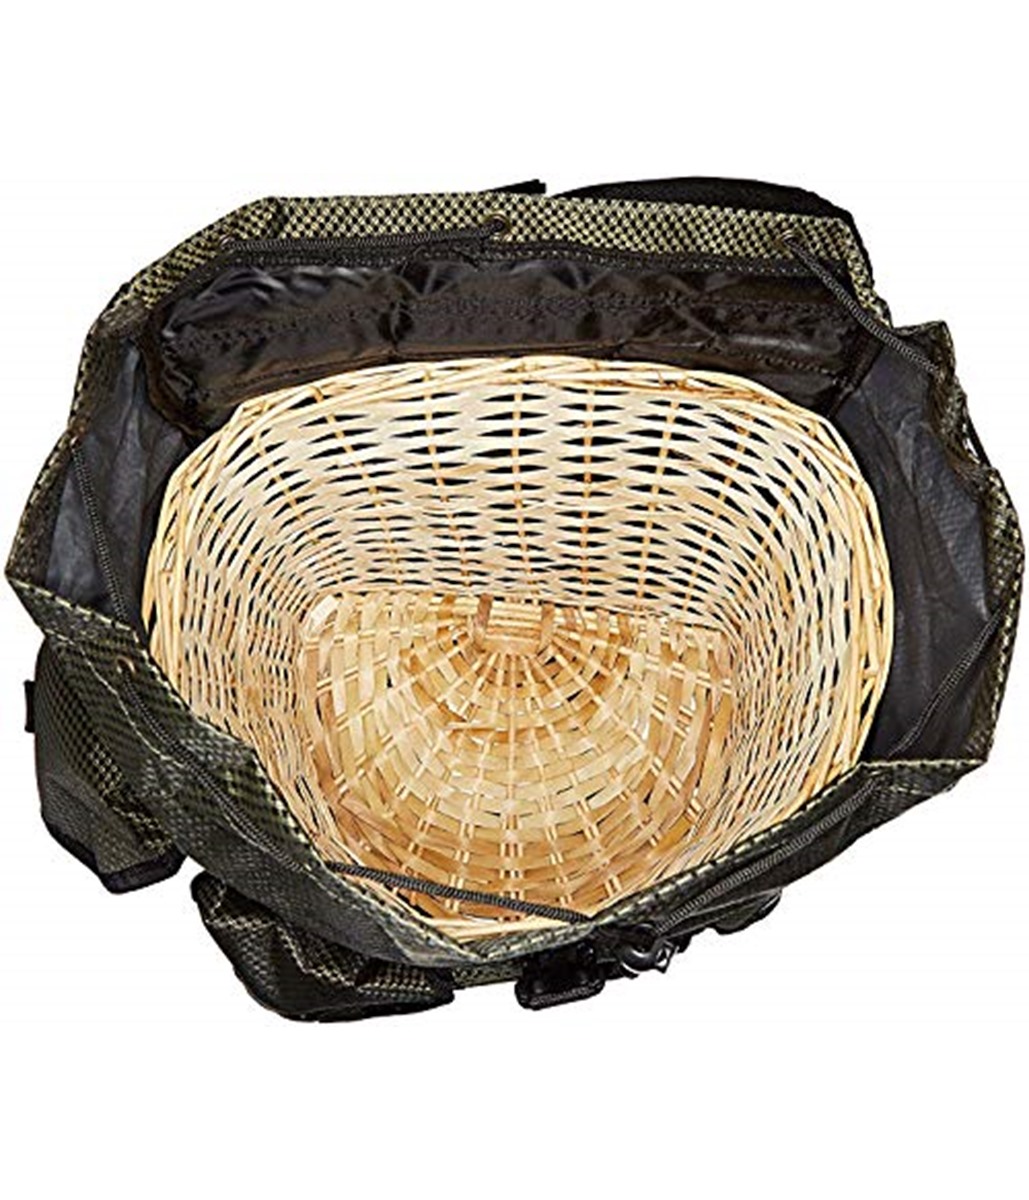 BACKPACK WITH WICKER BASKET